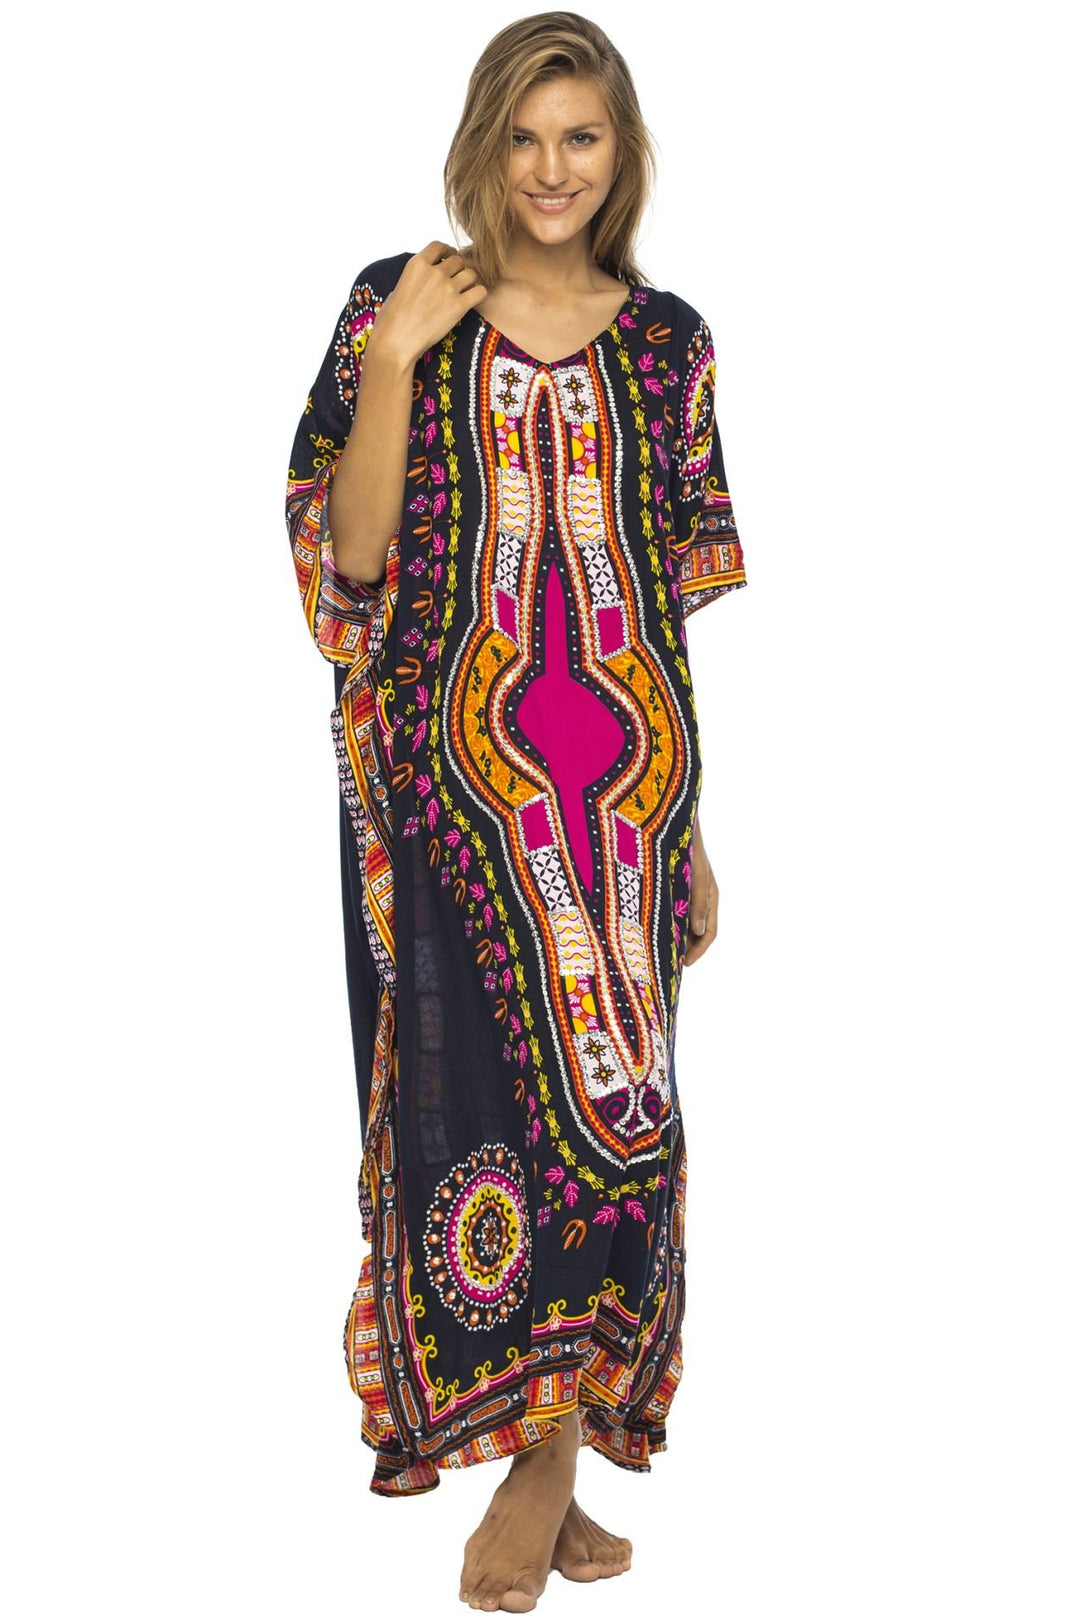 Back From Bali Womens Long Maxi Swimsuit Beach Cover Up African Caftan Patterns